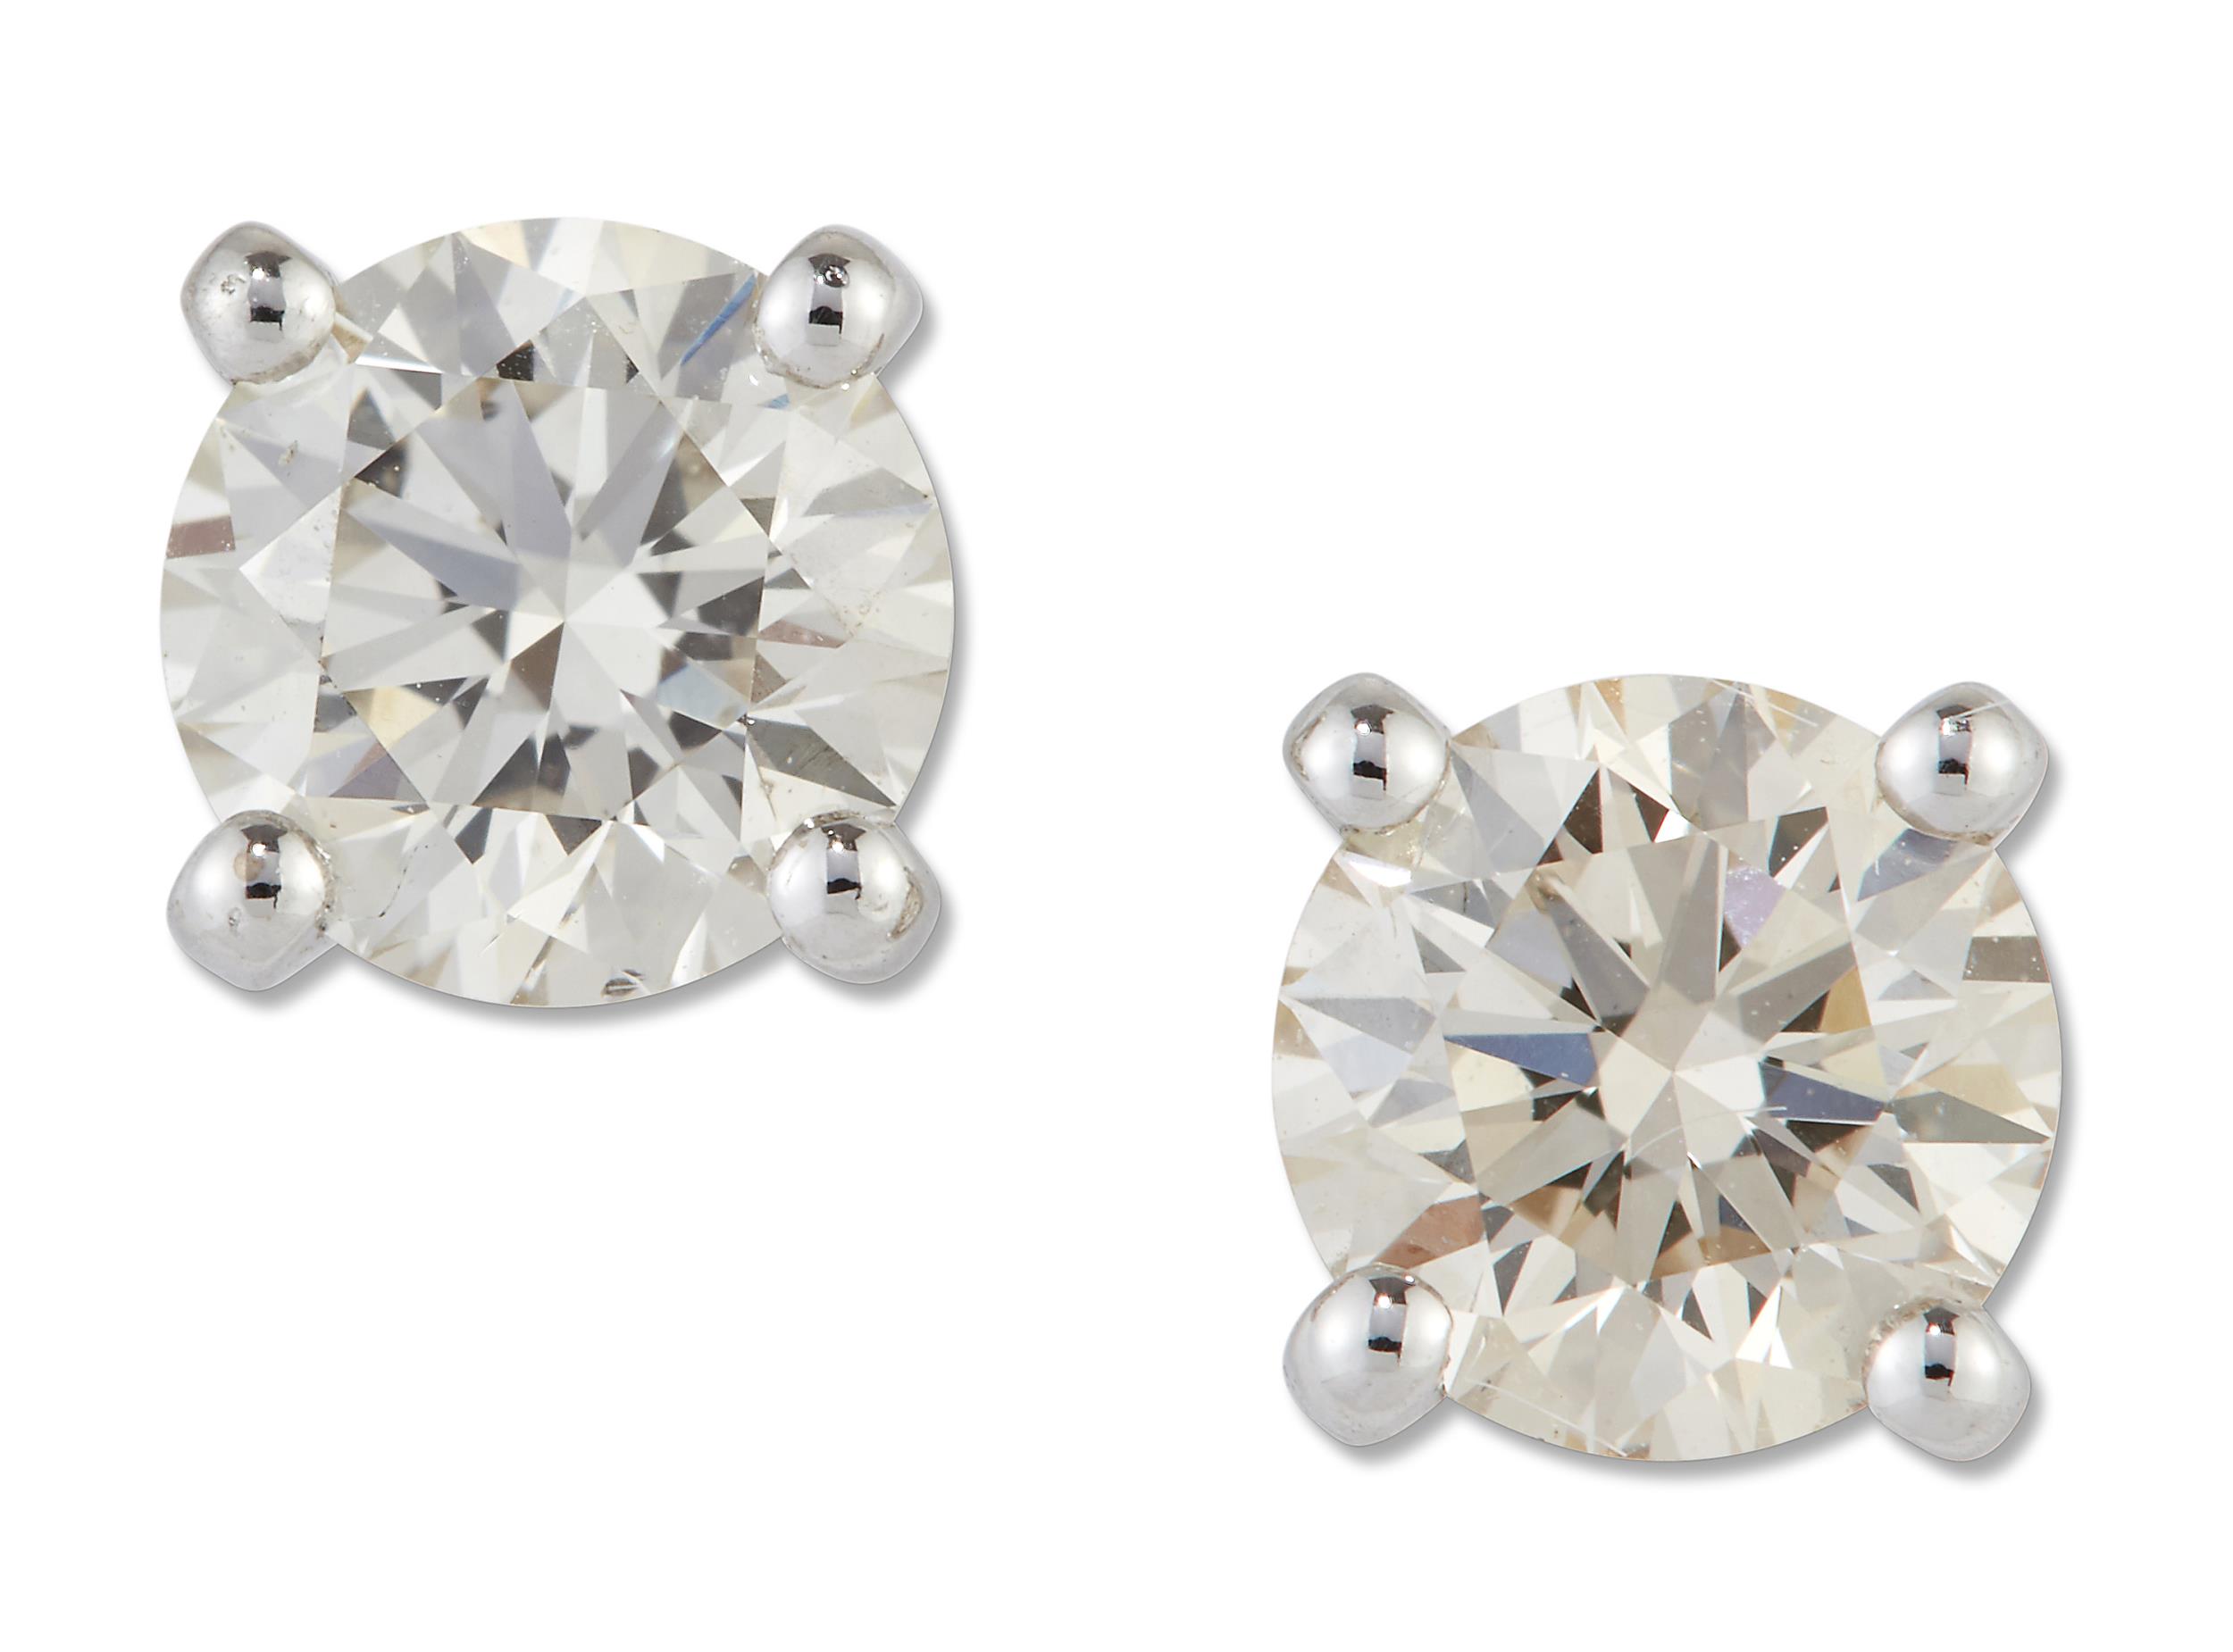 A PAIR OF SOLITAIRE DIAMOND EARRINGS